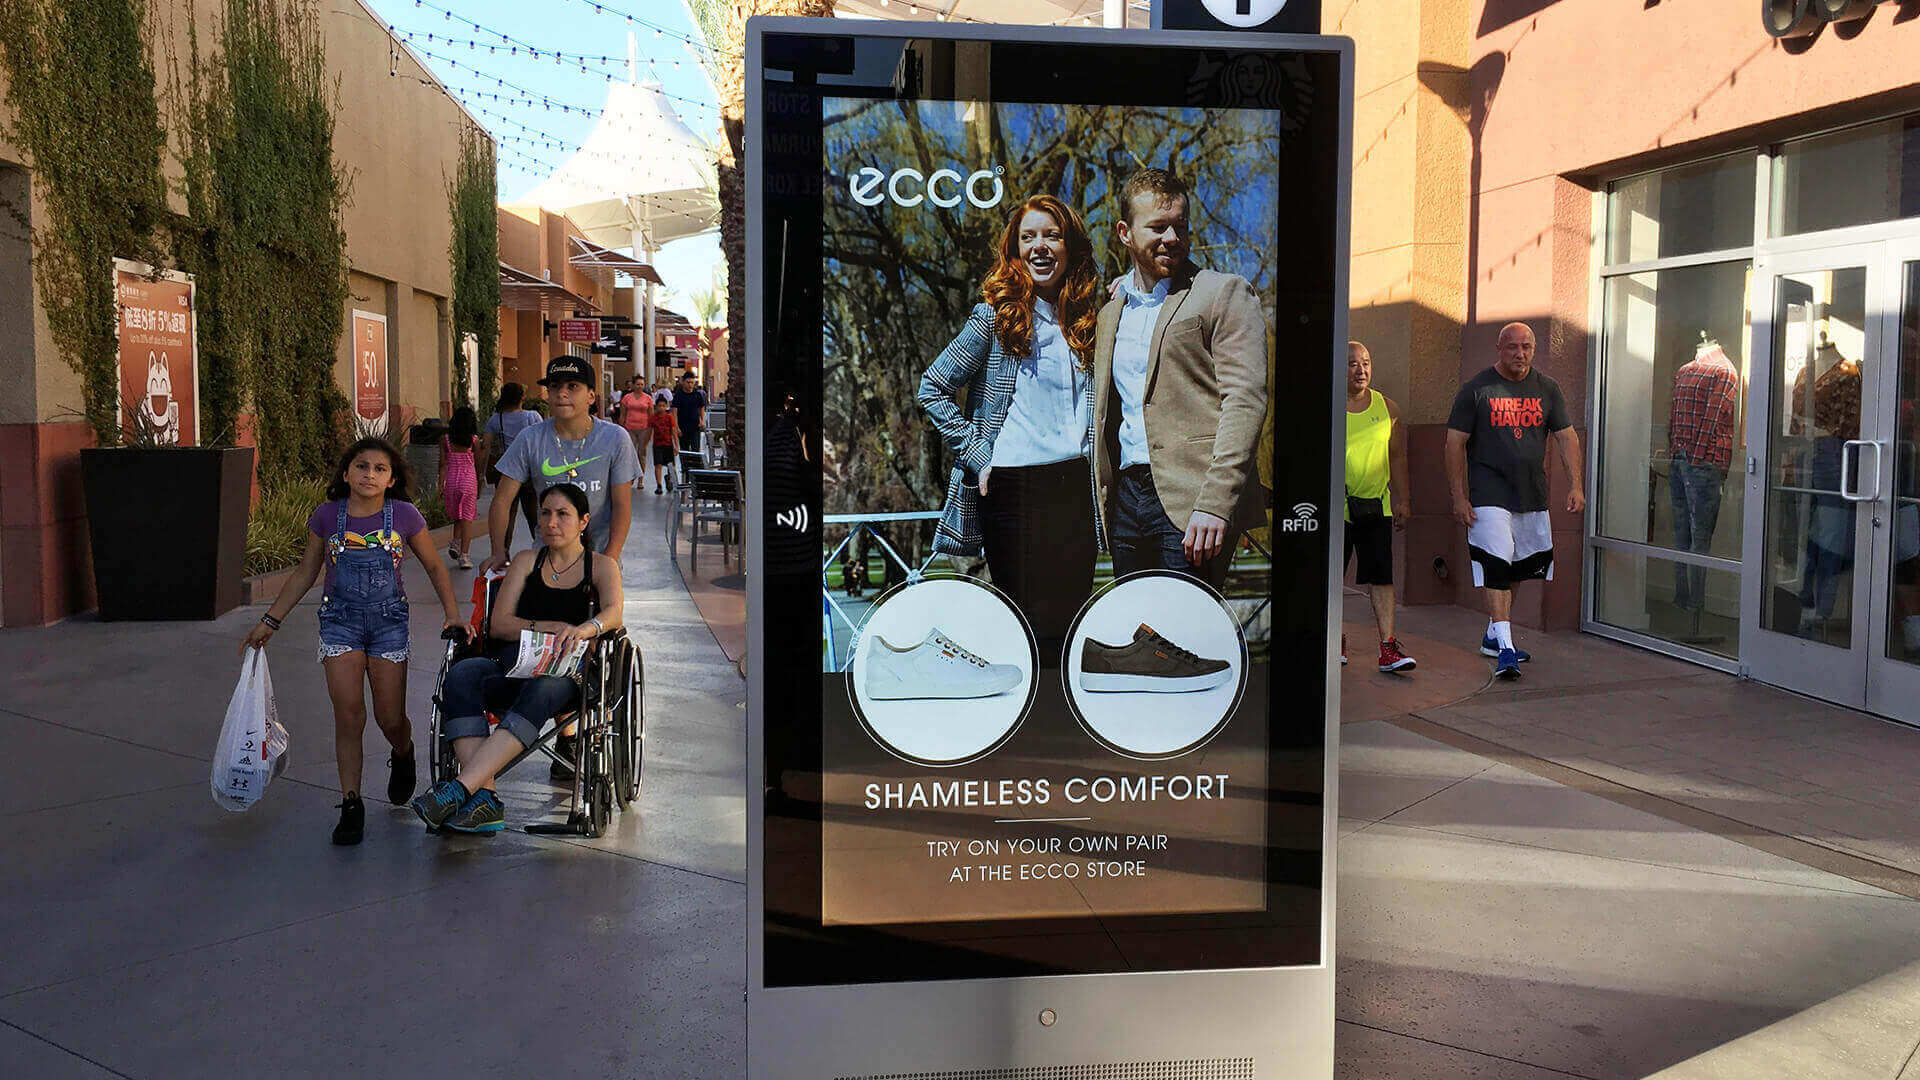 Outdoor mall point-of-purchase DOOH screen